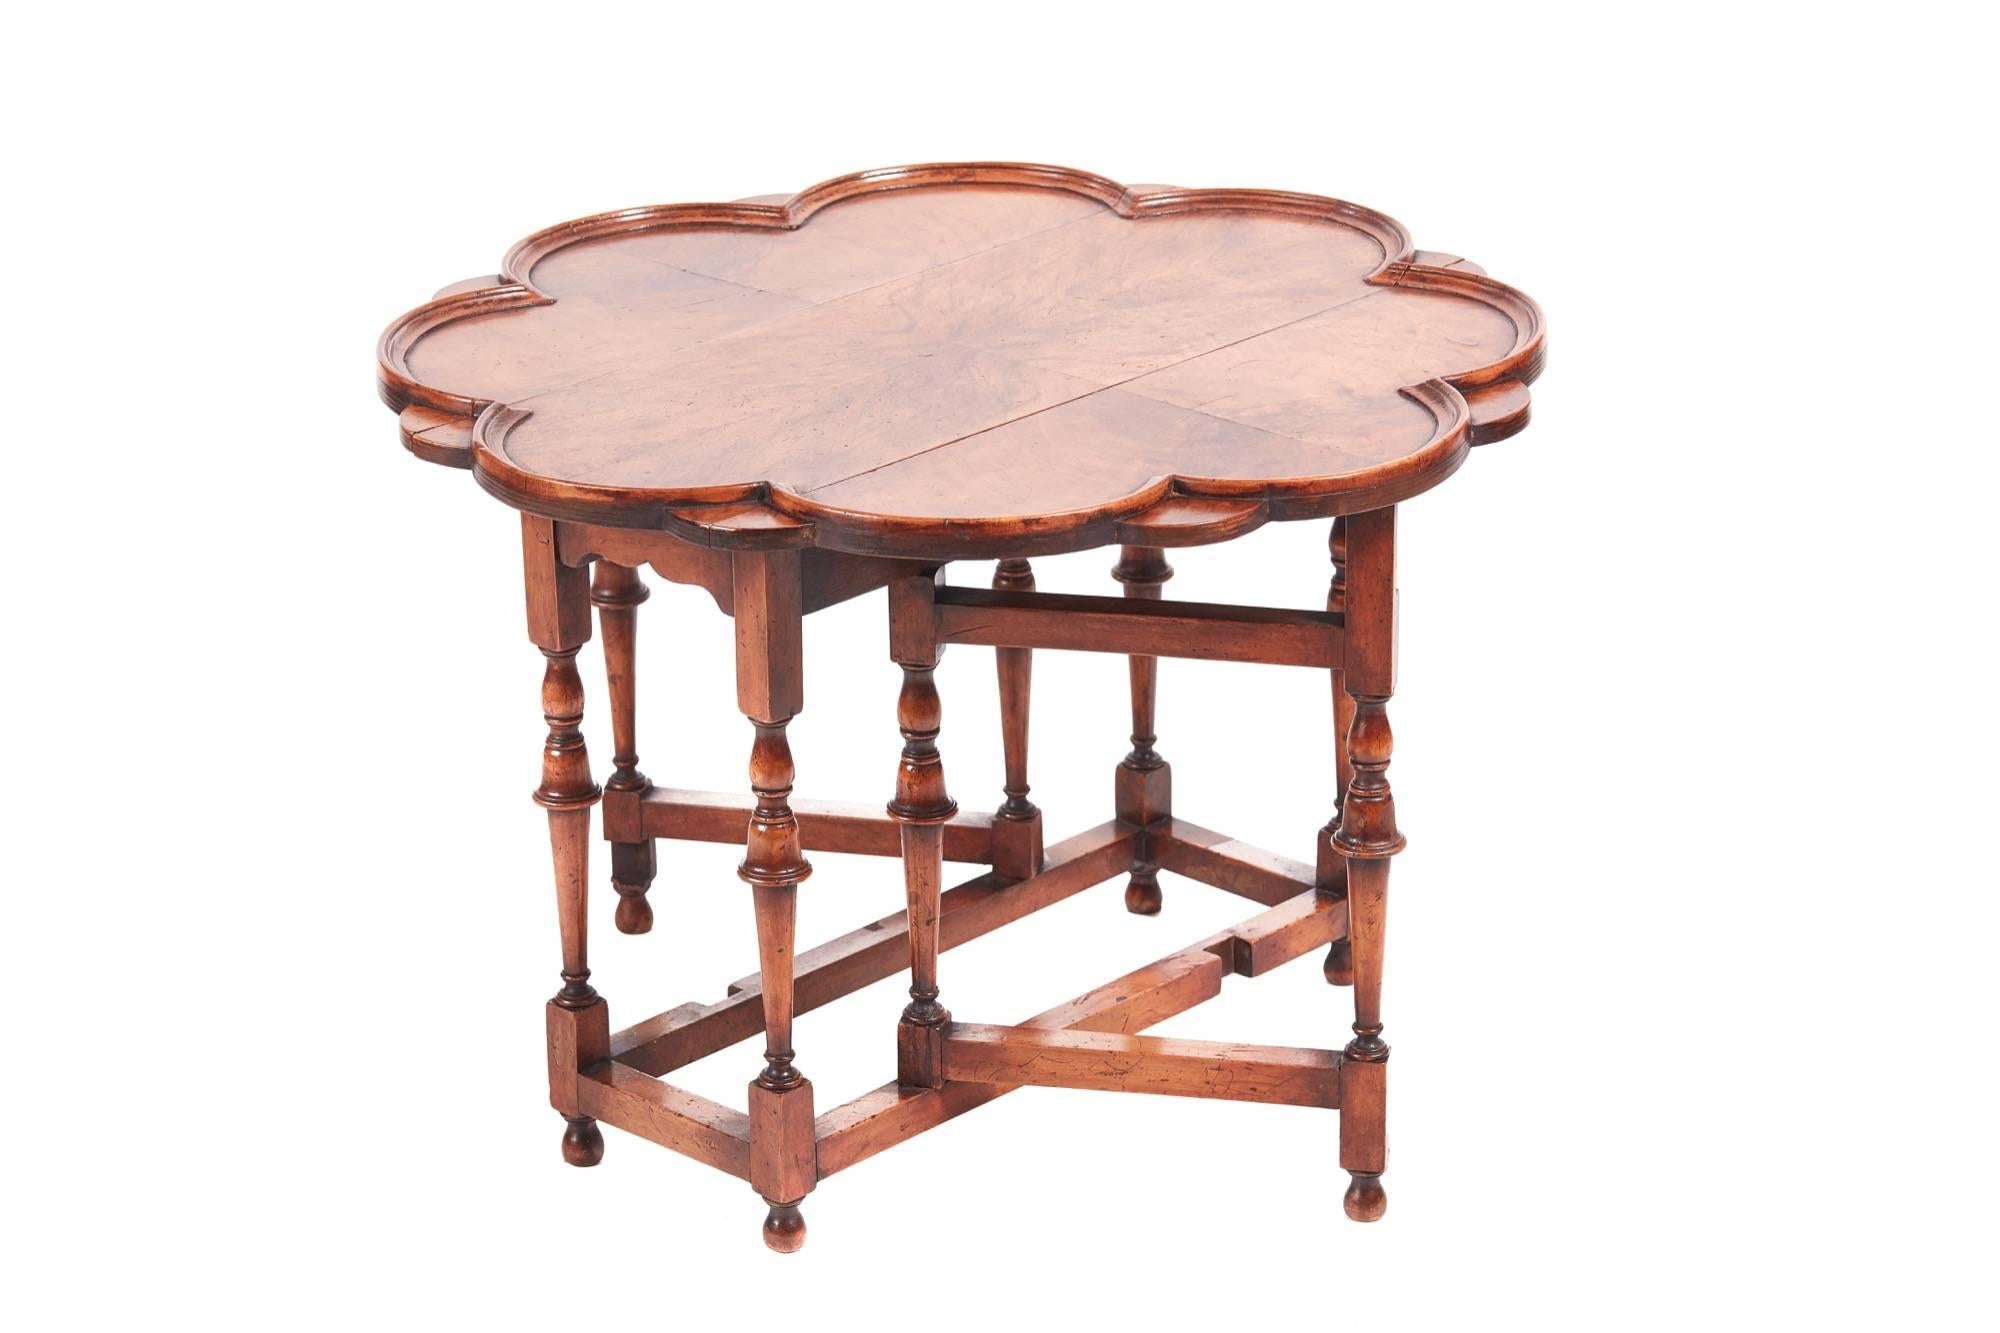 Outstanding walnut drop-leaf coffee table, having a fantastic walnut shaped top with a moulded edge and two drop leaves, supported by eight solid walnut William and Mary style legs with ball feet united by solid walnut stretchers.